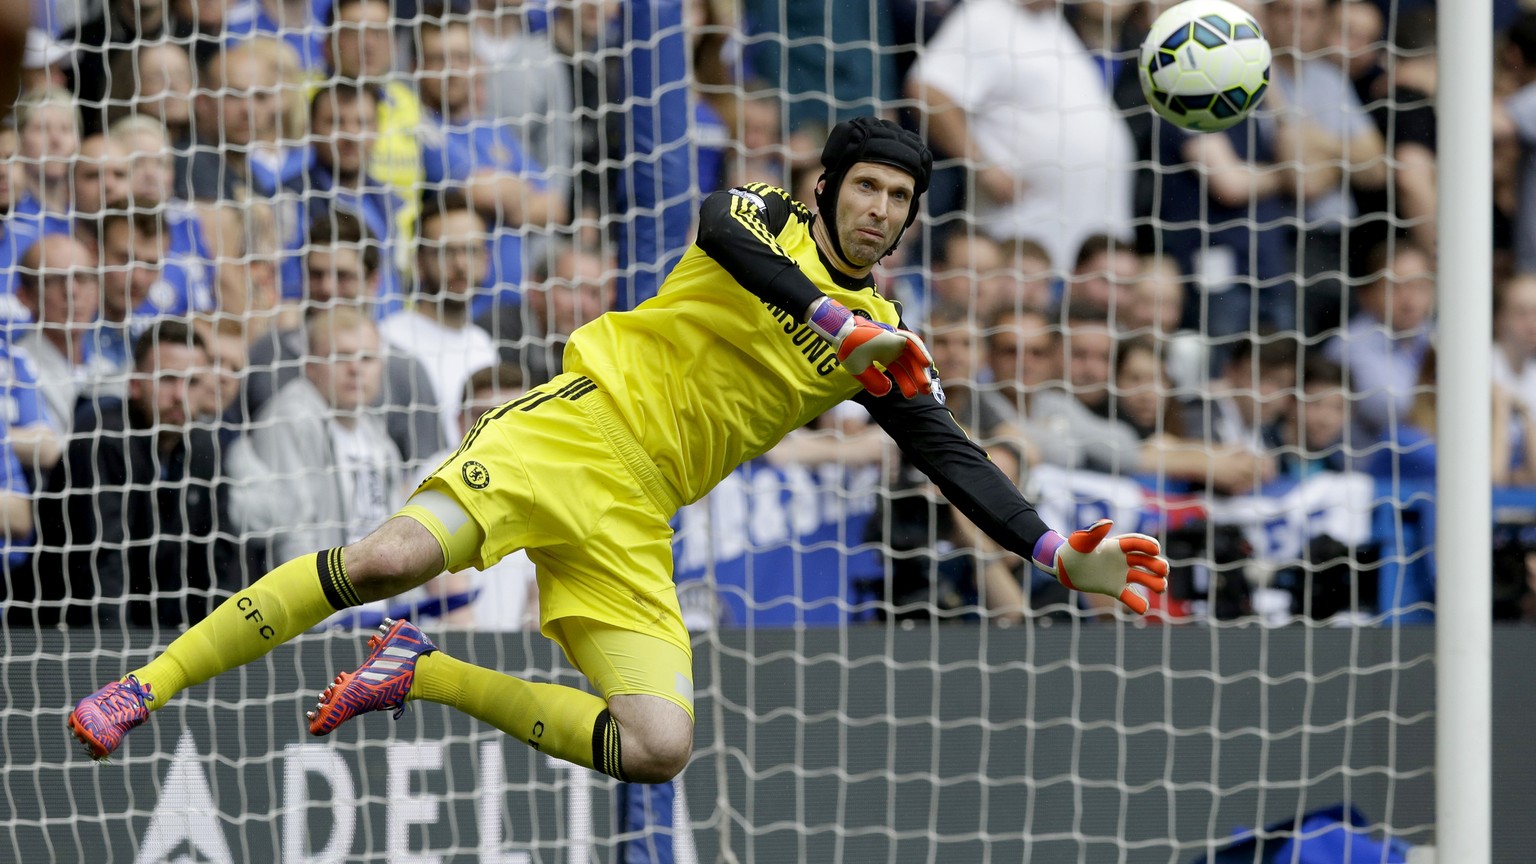 FILE - In this Sunday, May 24, 2015 file photo, Chelsea&#039;s goalkeeper Petr Cech makes a save during the English Premier League soccer match between Chelsea and Sunderland at Stamford Bridge stadiu ...